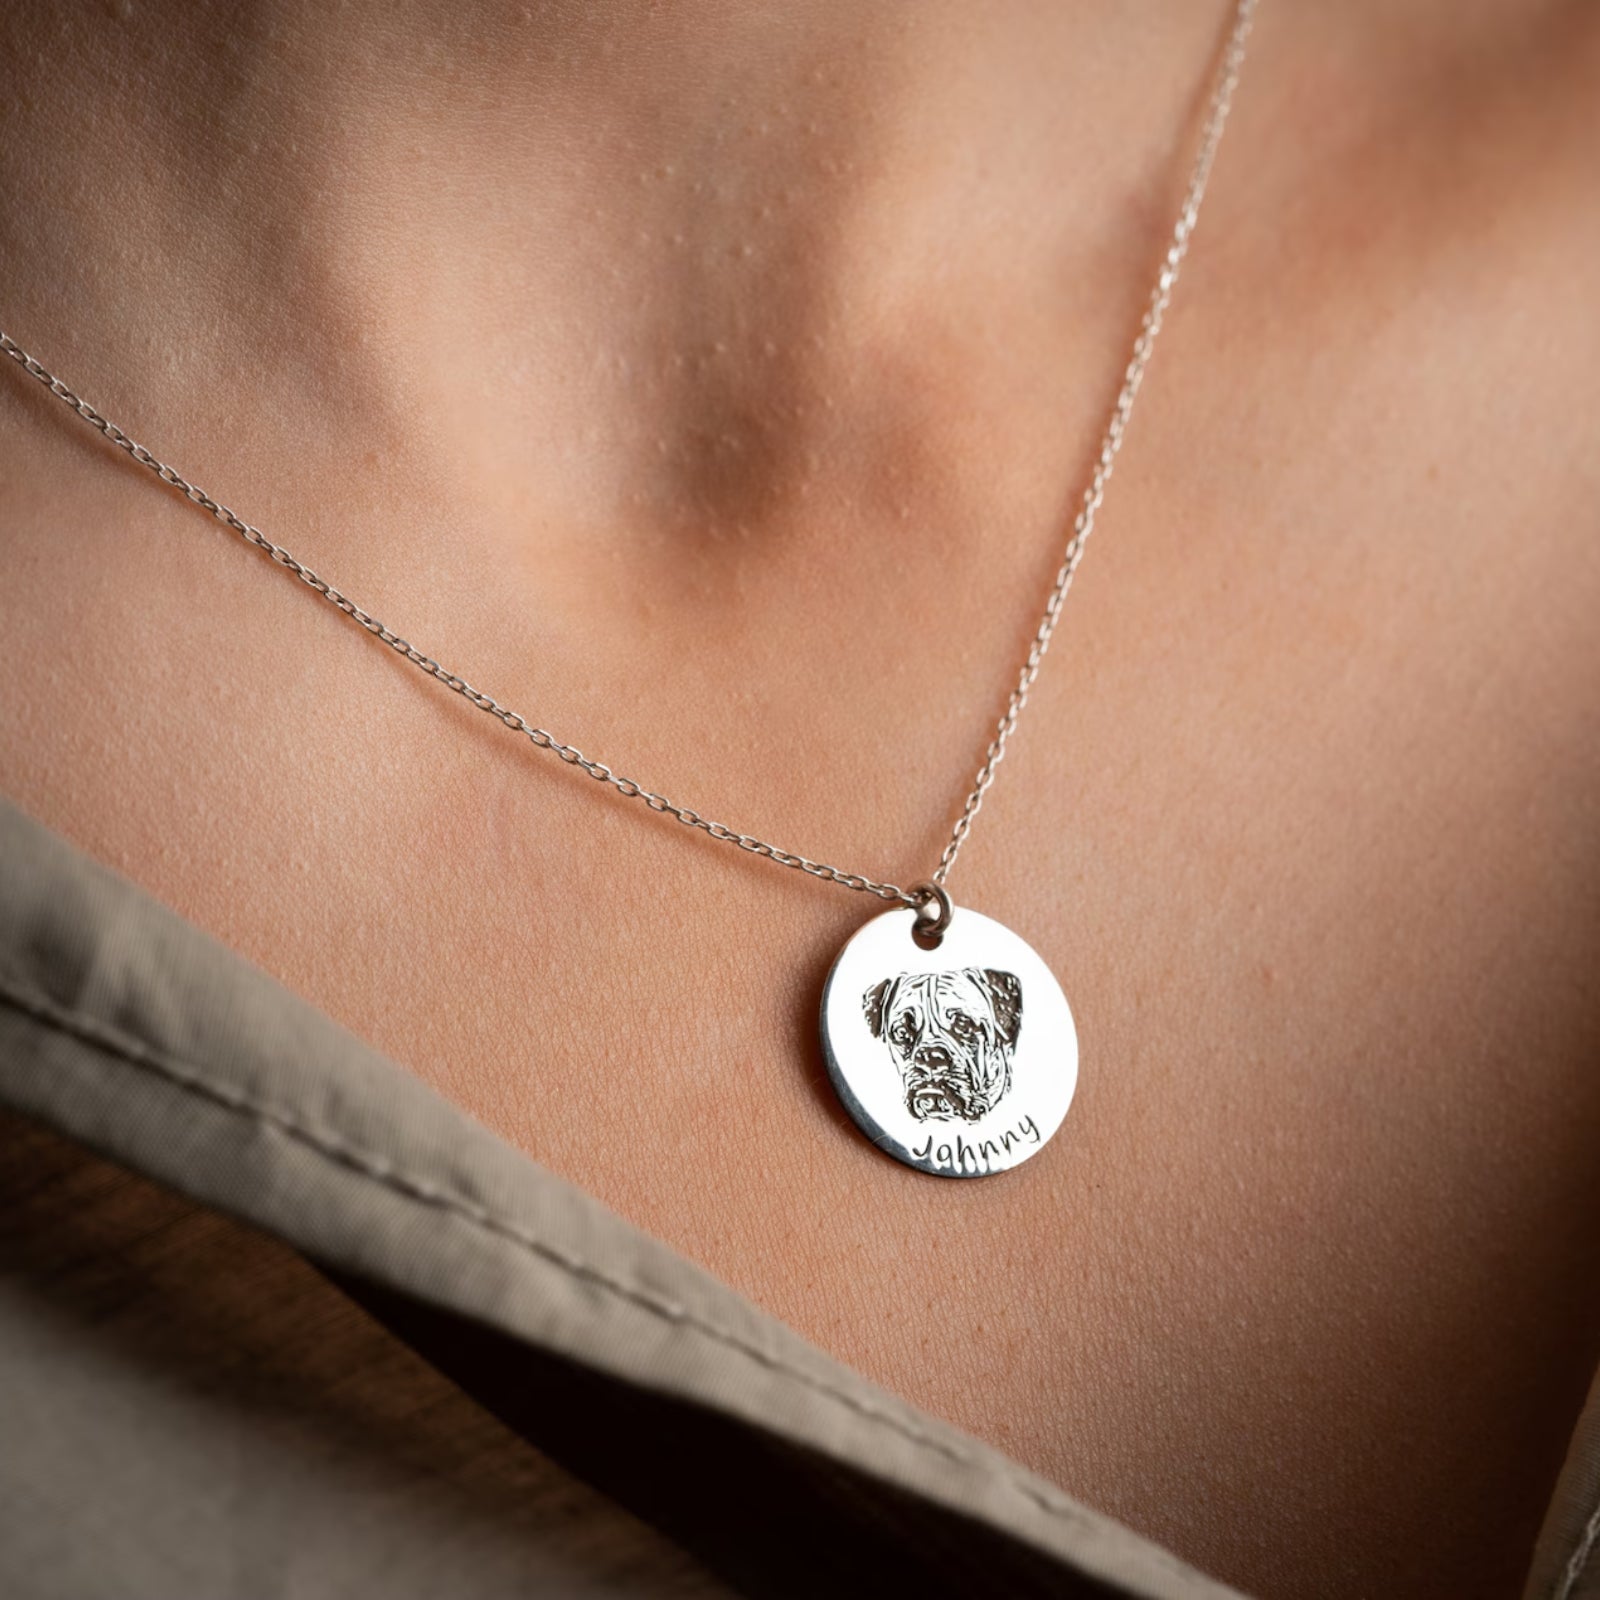 Personalized Pet Photo Necklace Gifts for The Pet Lover